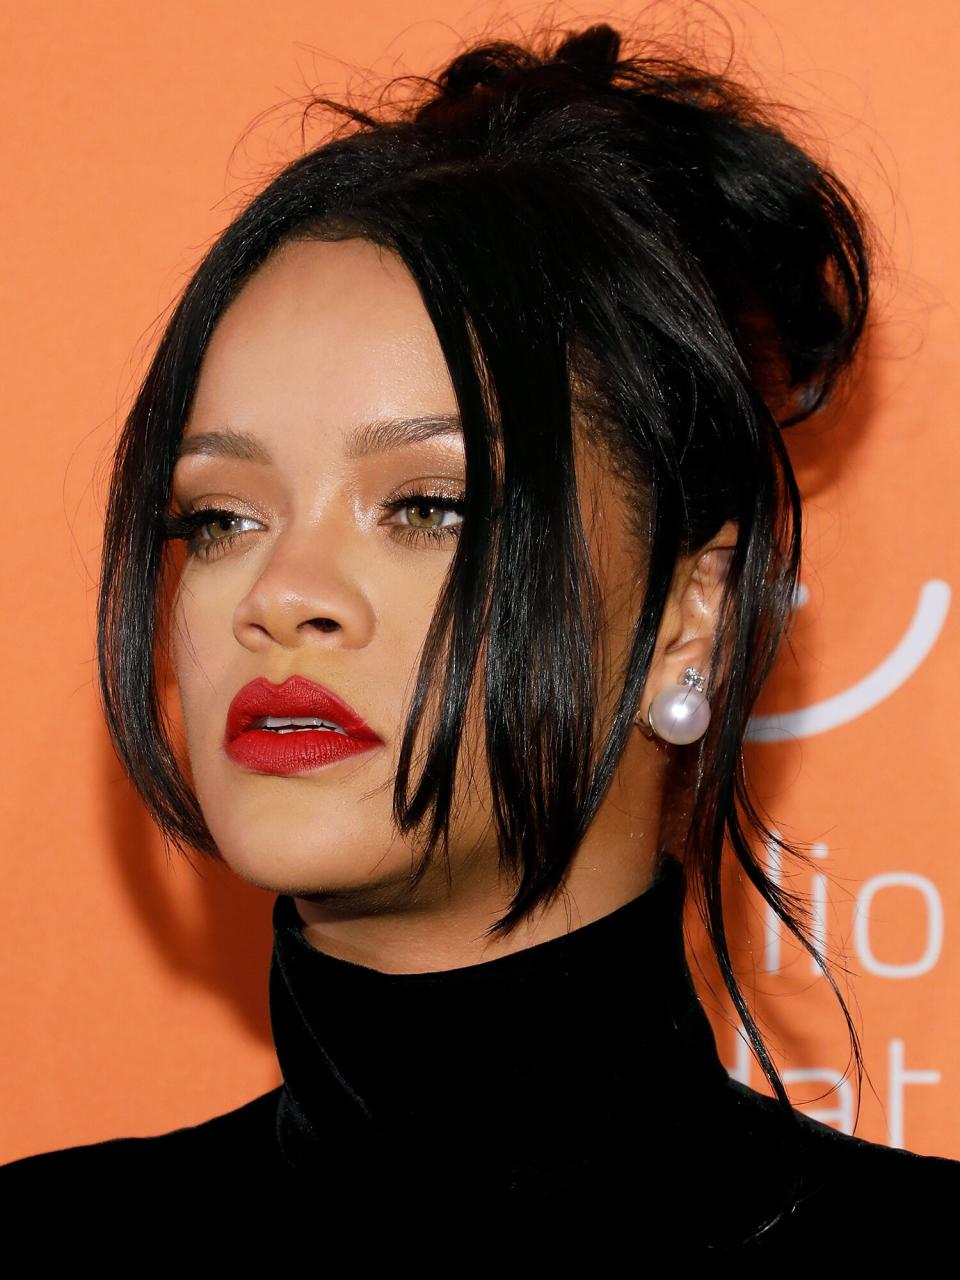 Rihanna attends the 5th Annual Diamond Ball benefiting the Clara Lionel Foundation at Cipriani Wall Street on September 12, 2019 in New York City